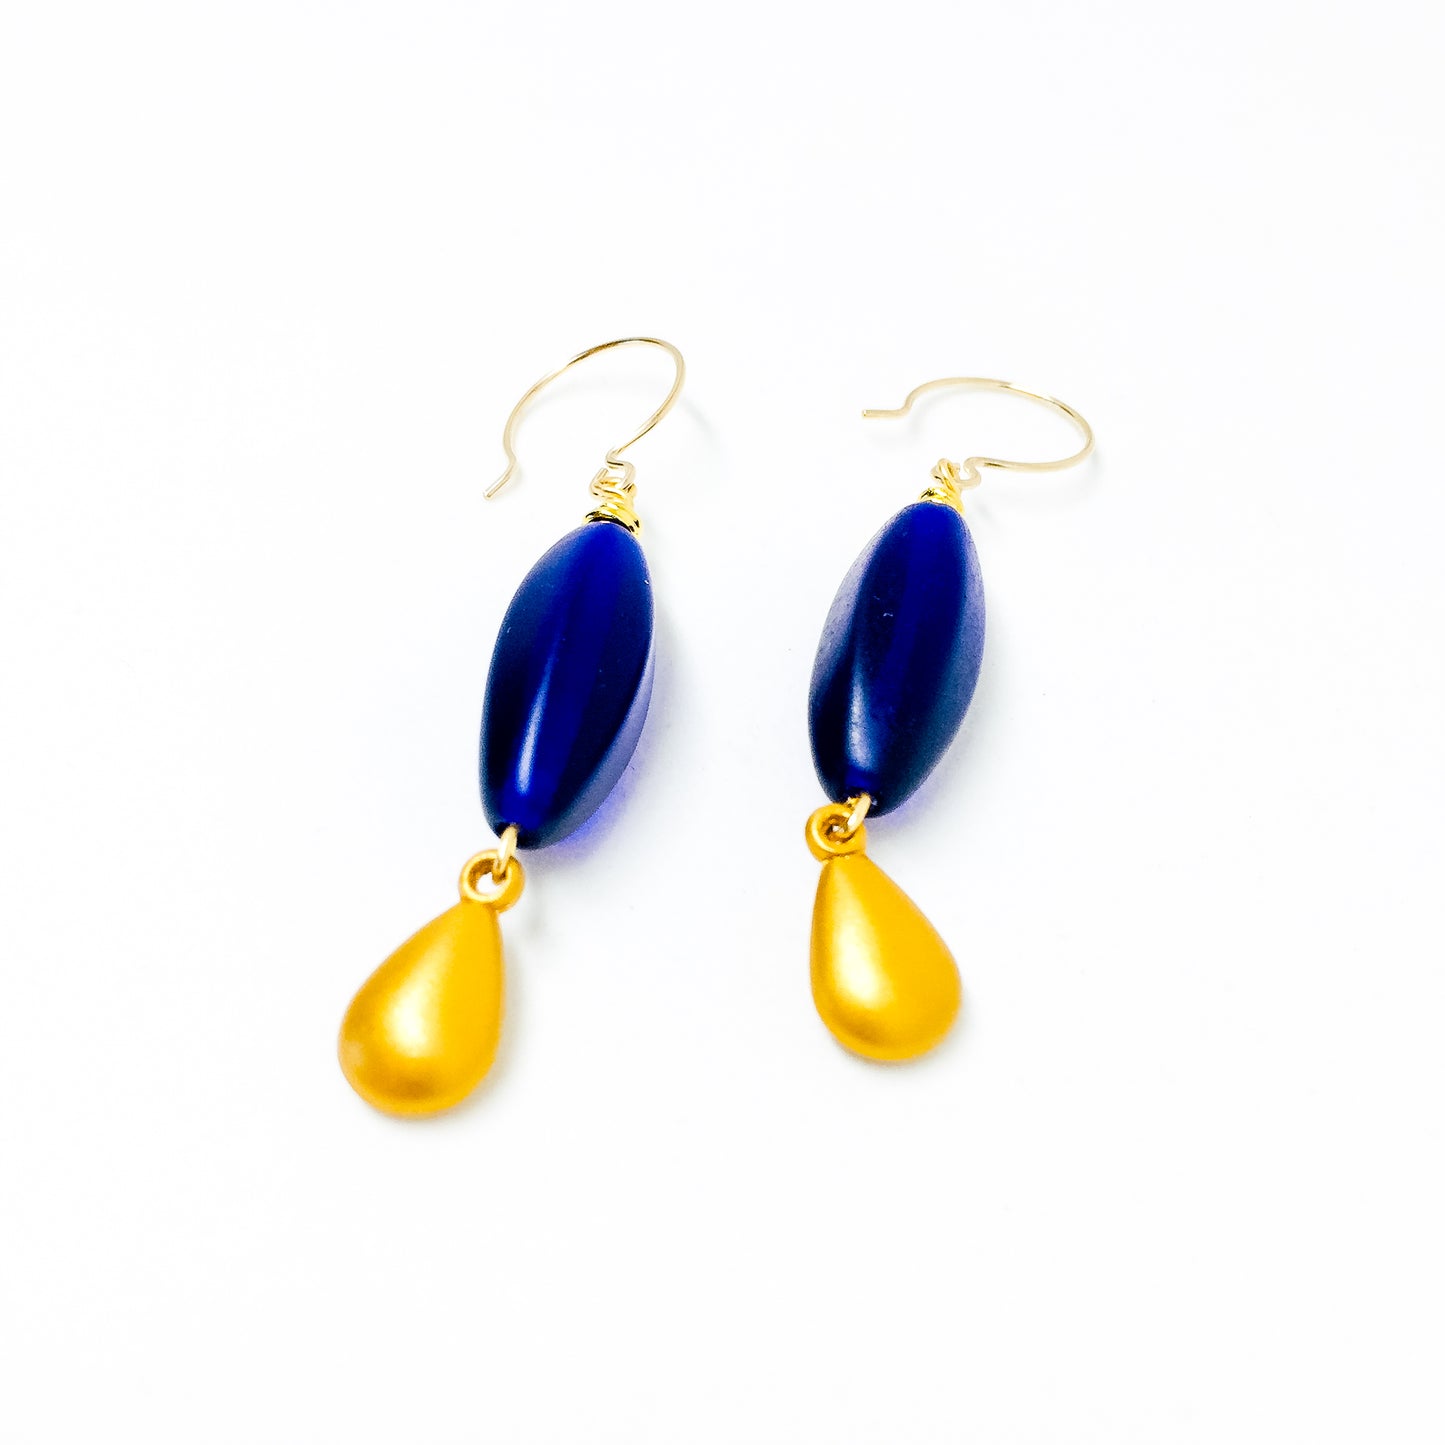 Blue Frosted Czech glass bead drop earrings with gold charm